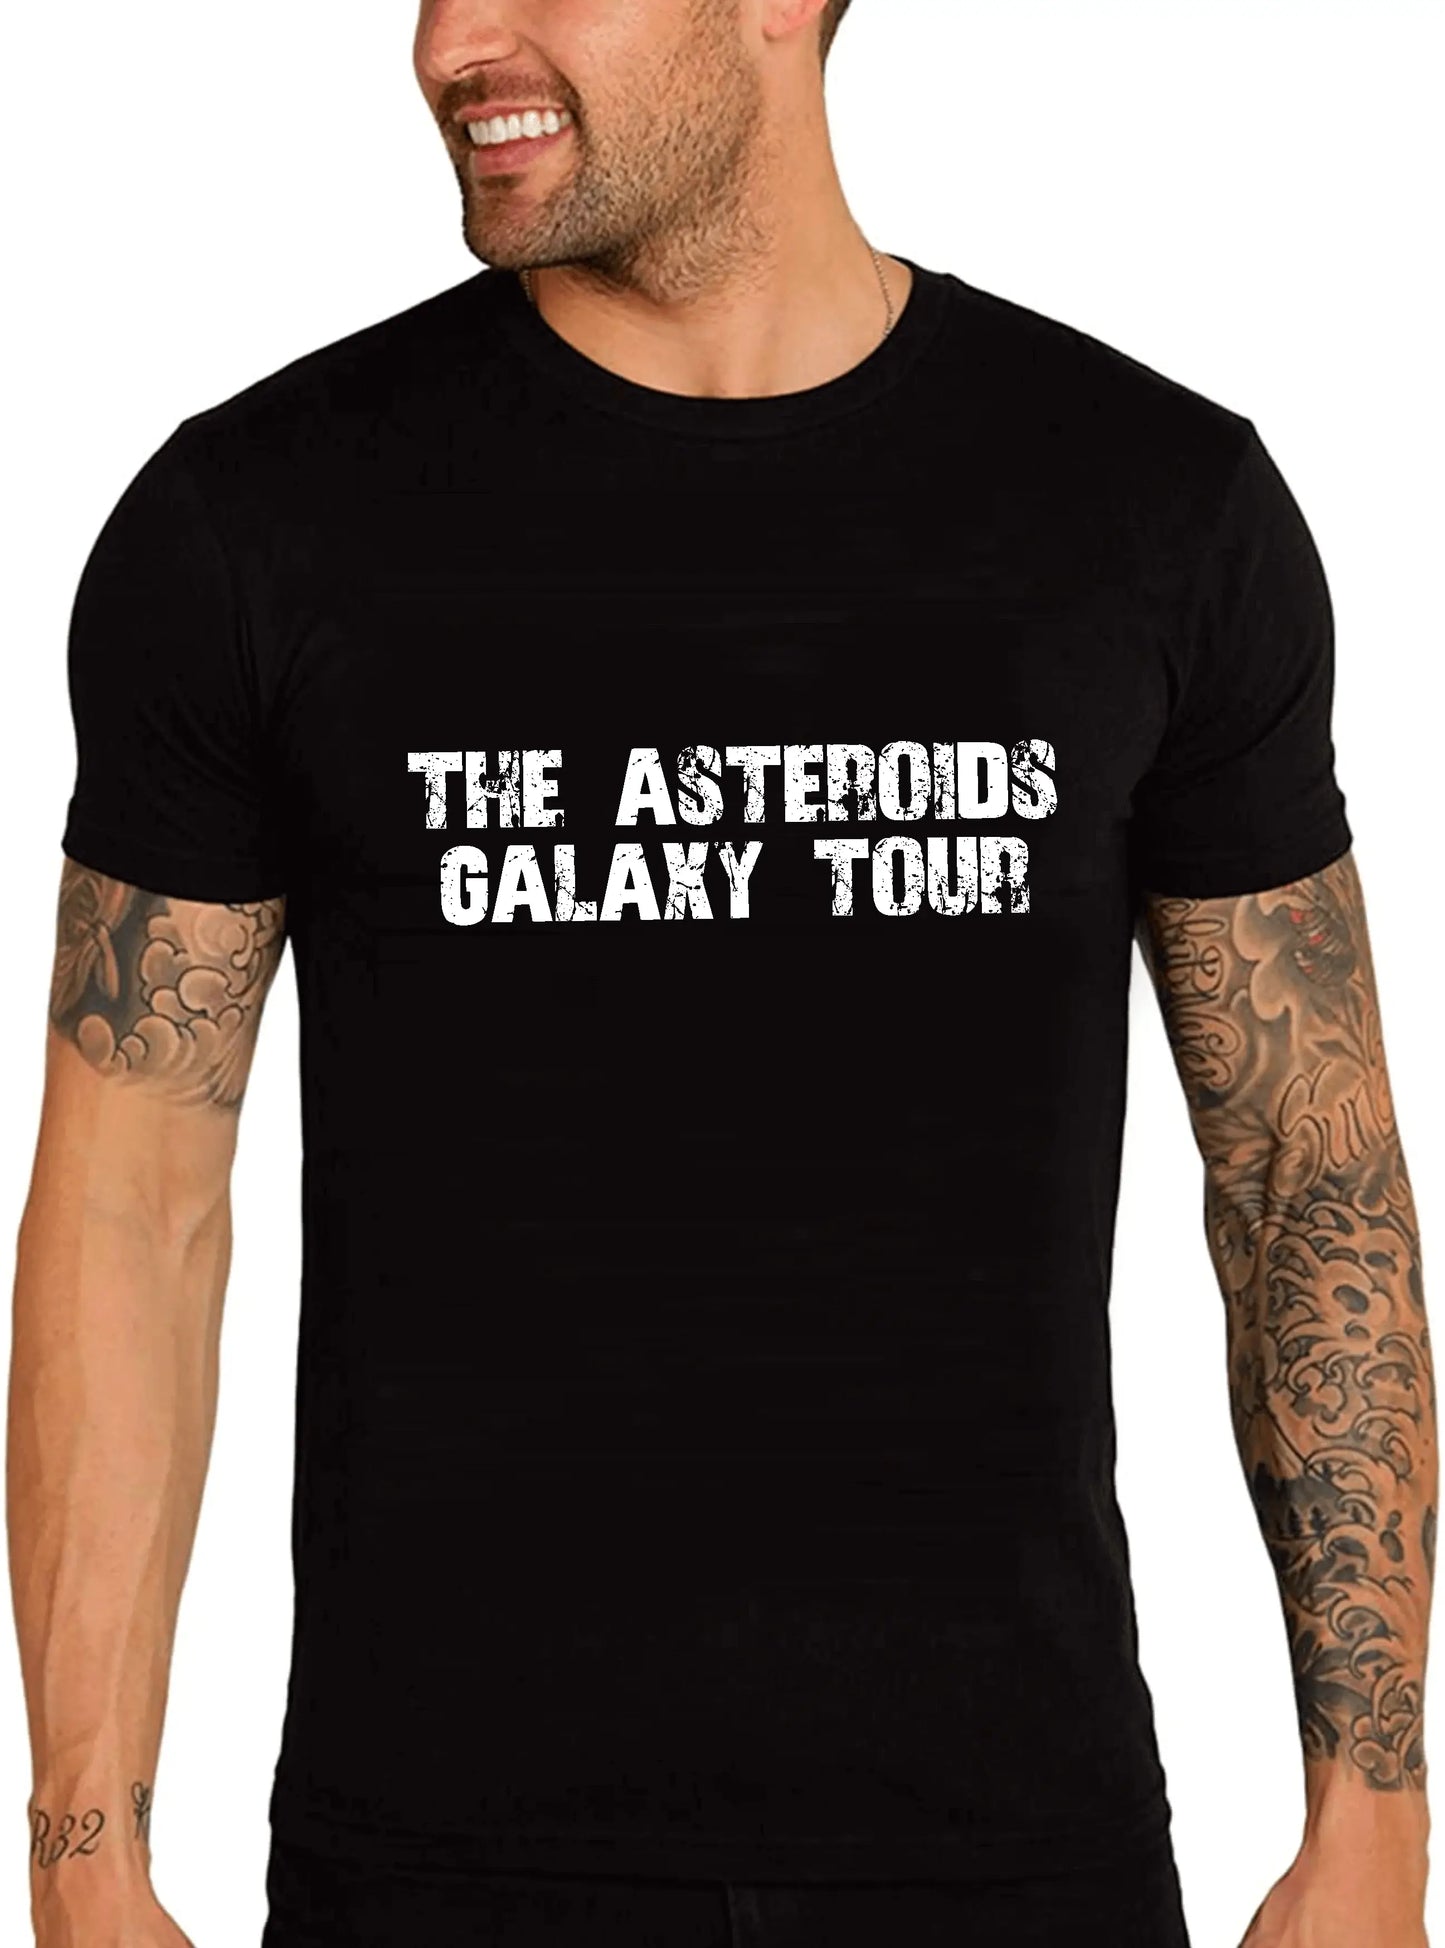 Men's Graphic T-Shirt The Asteroids Galaxy Tour Eco-Friendly Limited Edition Short Sleeve Tee-Shirt Vintage Birthday Gift Novelty